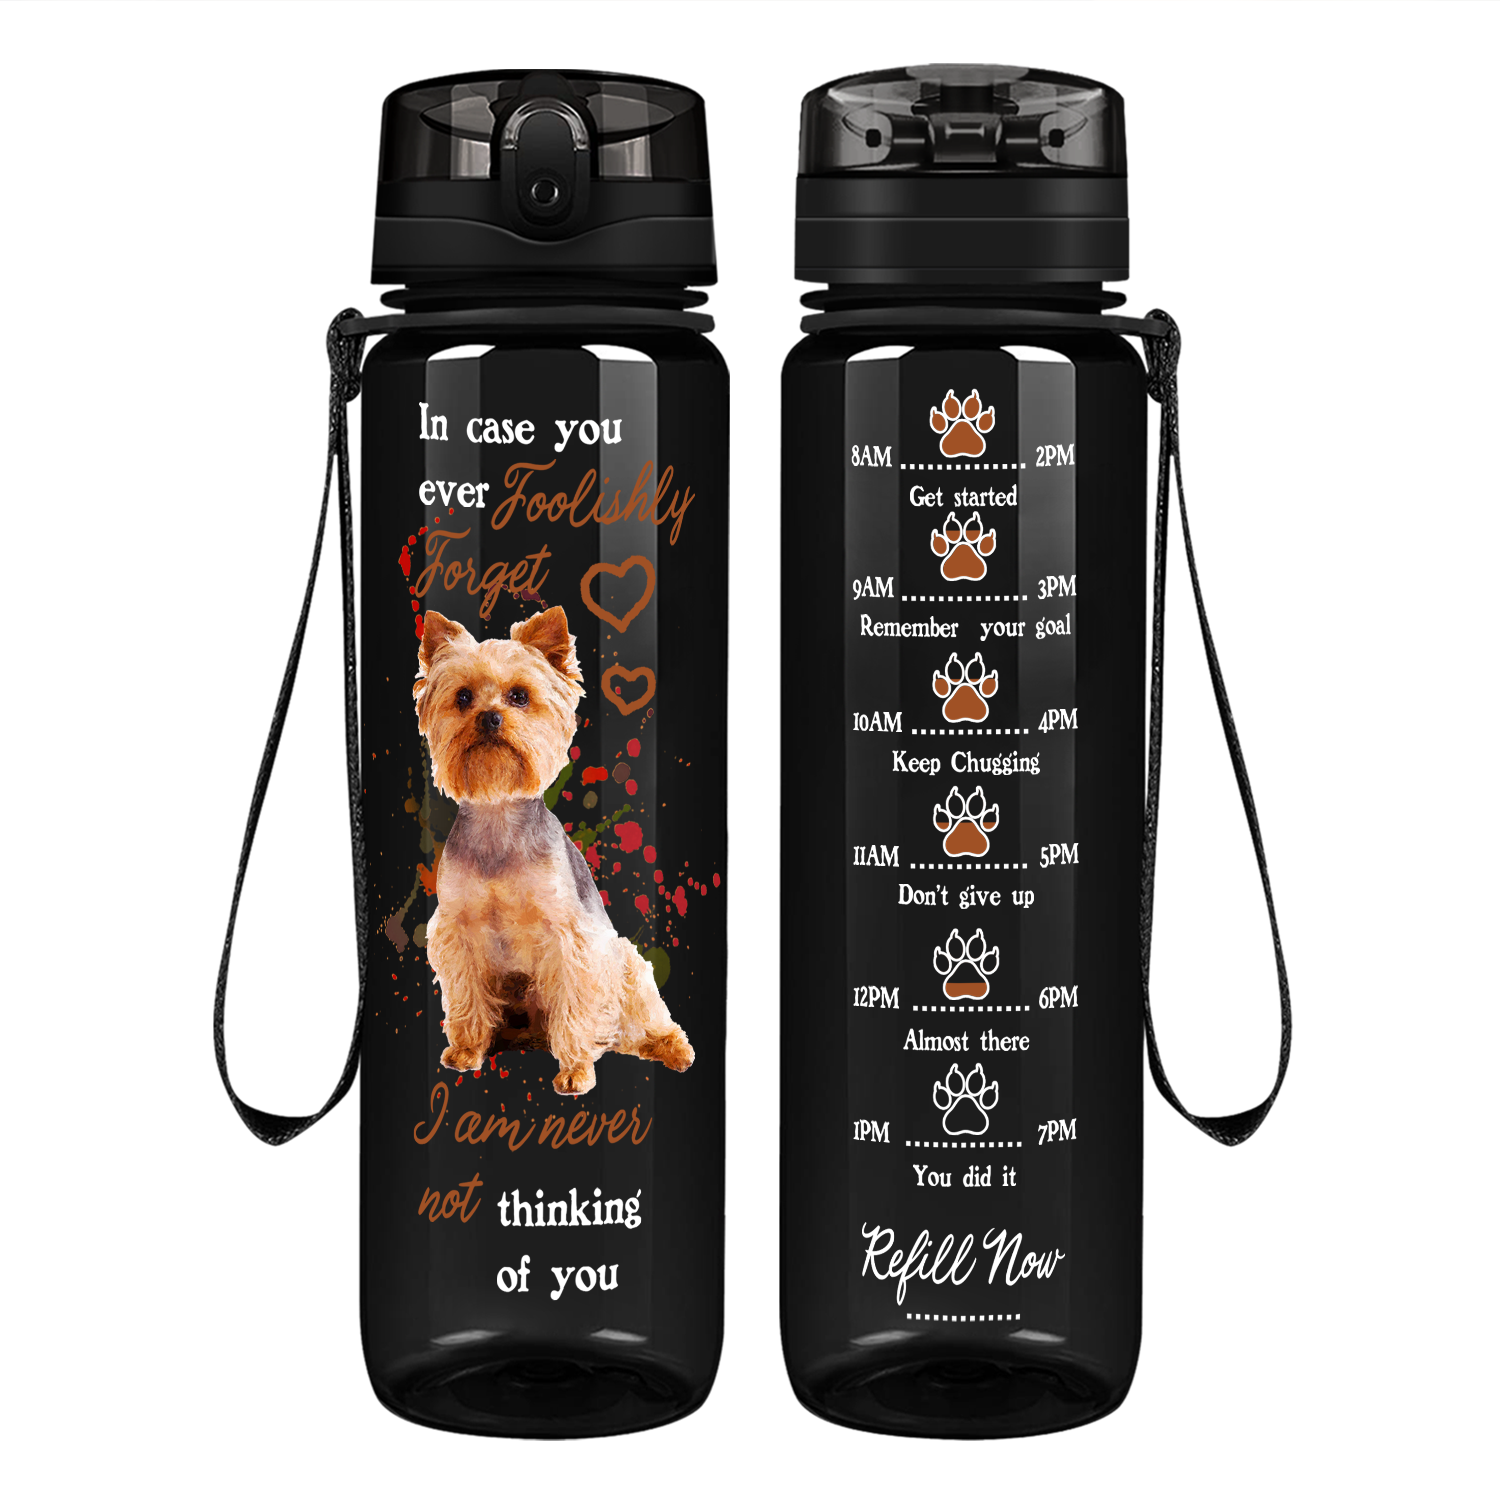 In Case you Forget Yorkshire Terrier on 32 oz Motivational Tracking Water Bottle